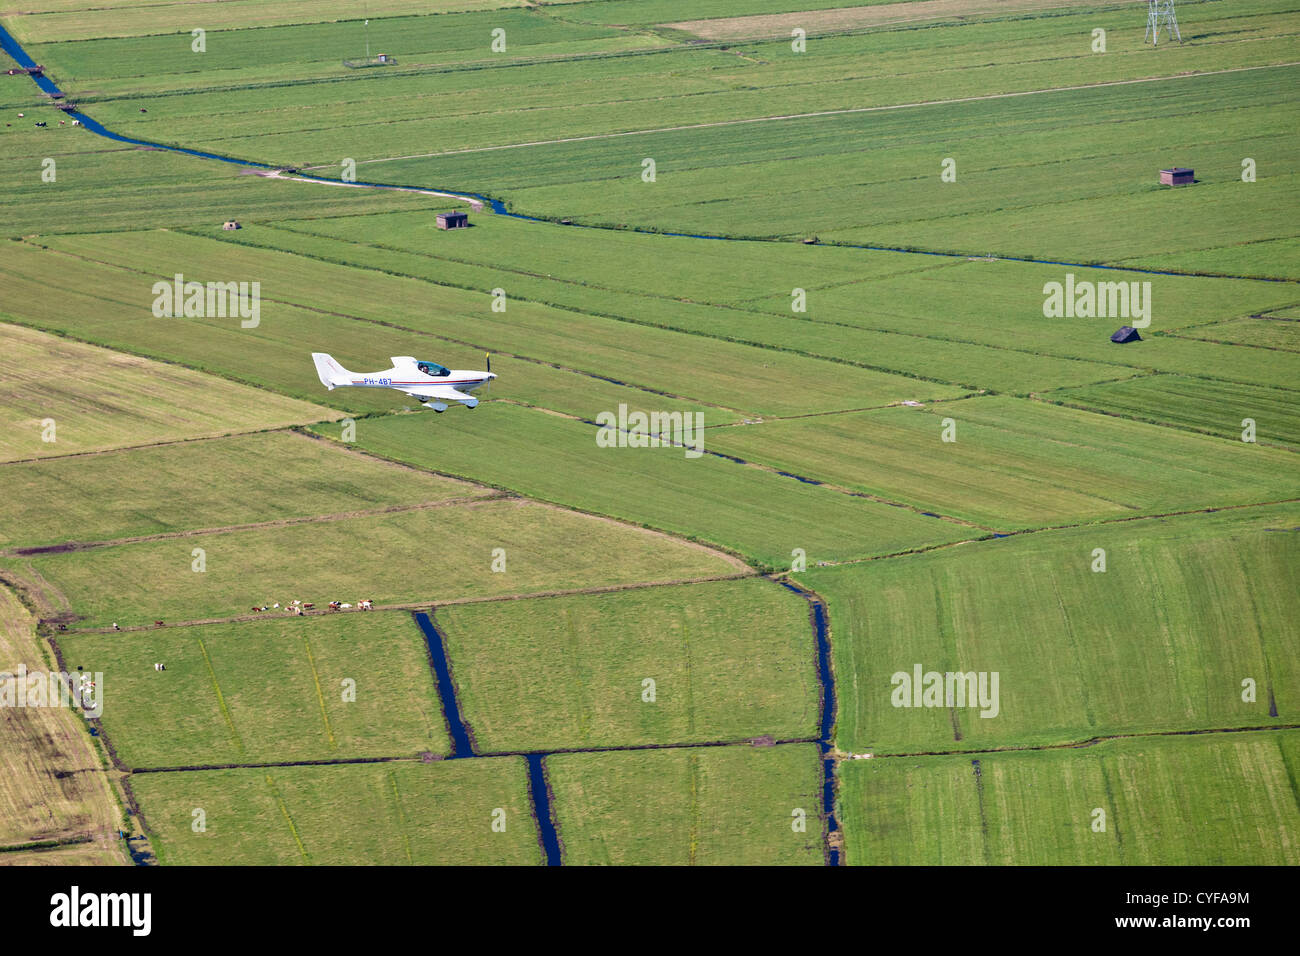 The Netherlands, Muiden. Small airplane flying over farmland. Aerial. Stock Photo